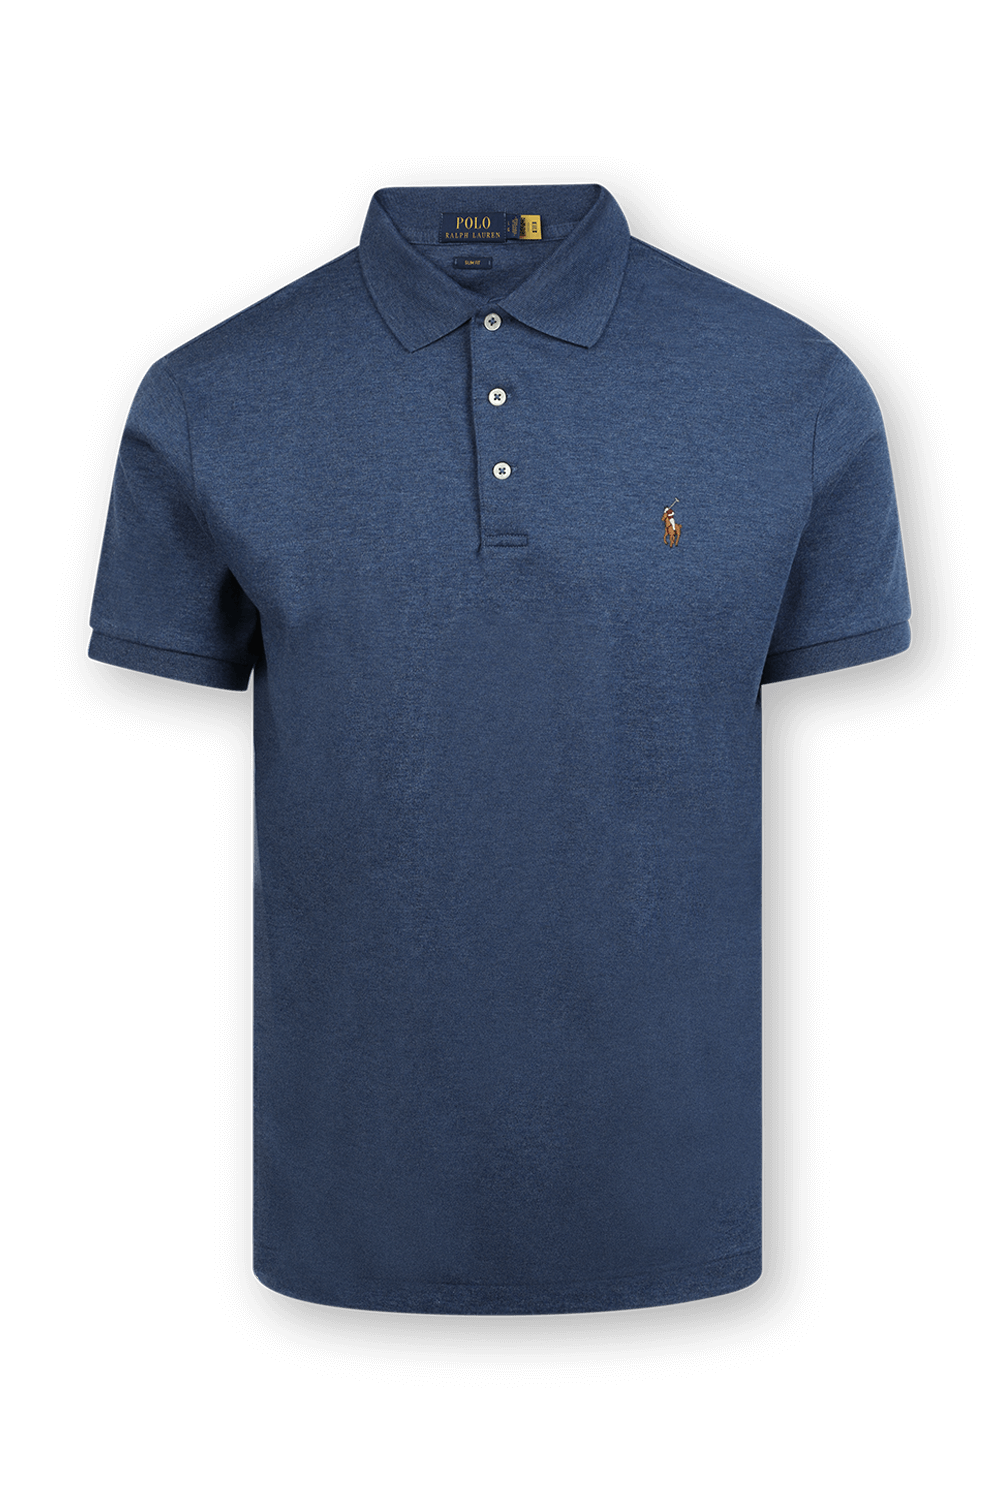 Short Sleeves Knit Polo Shirt in Derby Blue POLO RALPH LAUREN